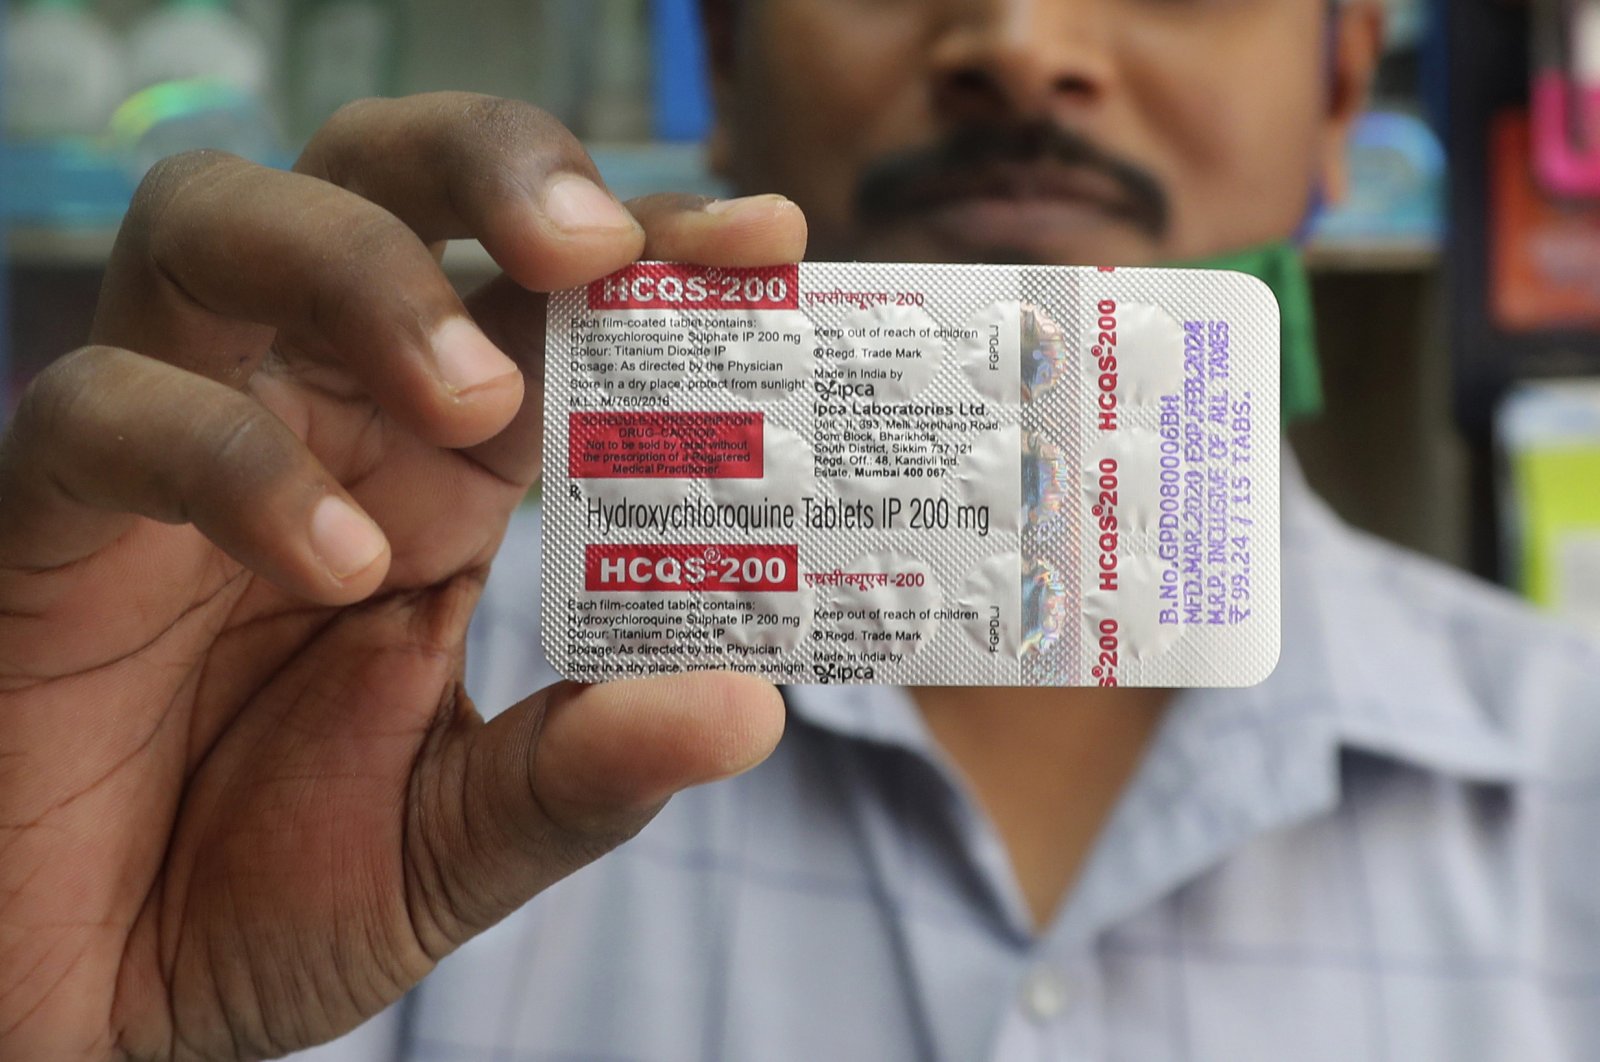 A chemist holds a pack of hydroxychloroquine tablets in Mumbai, India, May 19, 2020. (AP Photo)